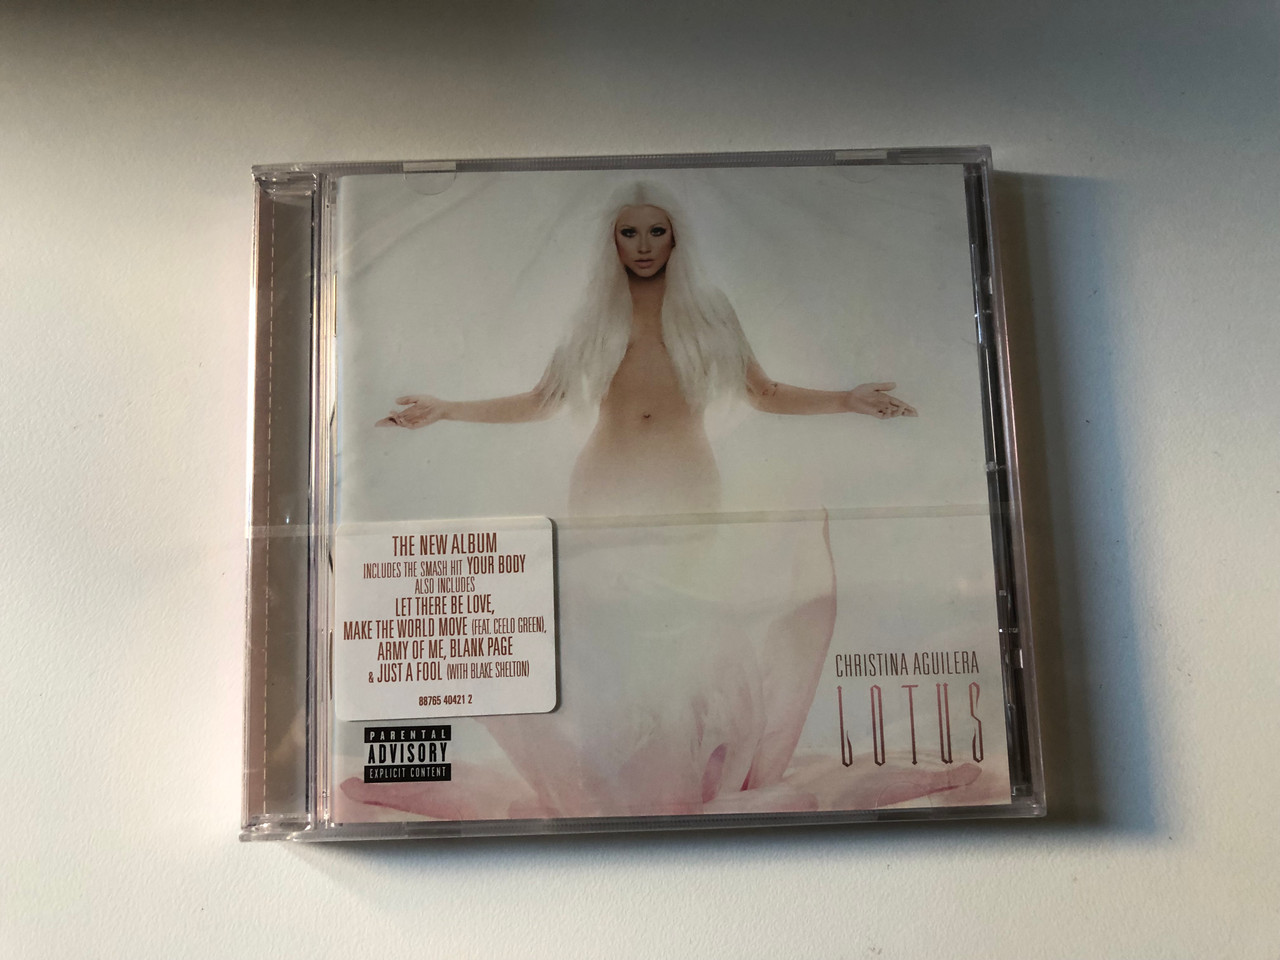 https://cdn10.bigcommerce.com/s-62bdpkt7pb/products/0/images/206424/Christina_Aguilera_Lotus_The_New_Album_Includes_The_Smash_Hit_Your_Body_also_includes_Let_There_Be_Love_Make_The_World_Move_Feat._Ceelo_Green_Army_Of_Me_Blank_Page_Just_1__20061.1642004727.1280.1280.JPG?c=2&_gl=1*1nlv26t*_ga*MjA2NTIxMjE2MC4xNTkwNTEyNTMy*_ga_WS2VZYPC6G*MTY0MTk5OTM4OS4yNTguMS4xNjQyMDA0NTI0LjEw